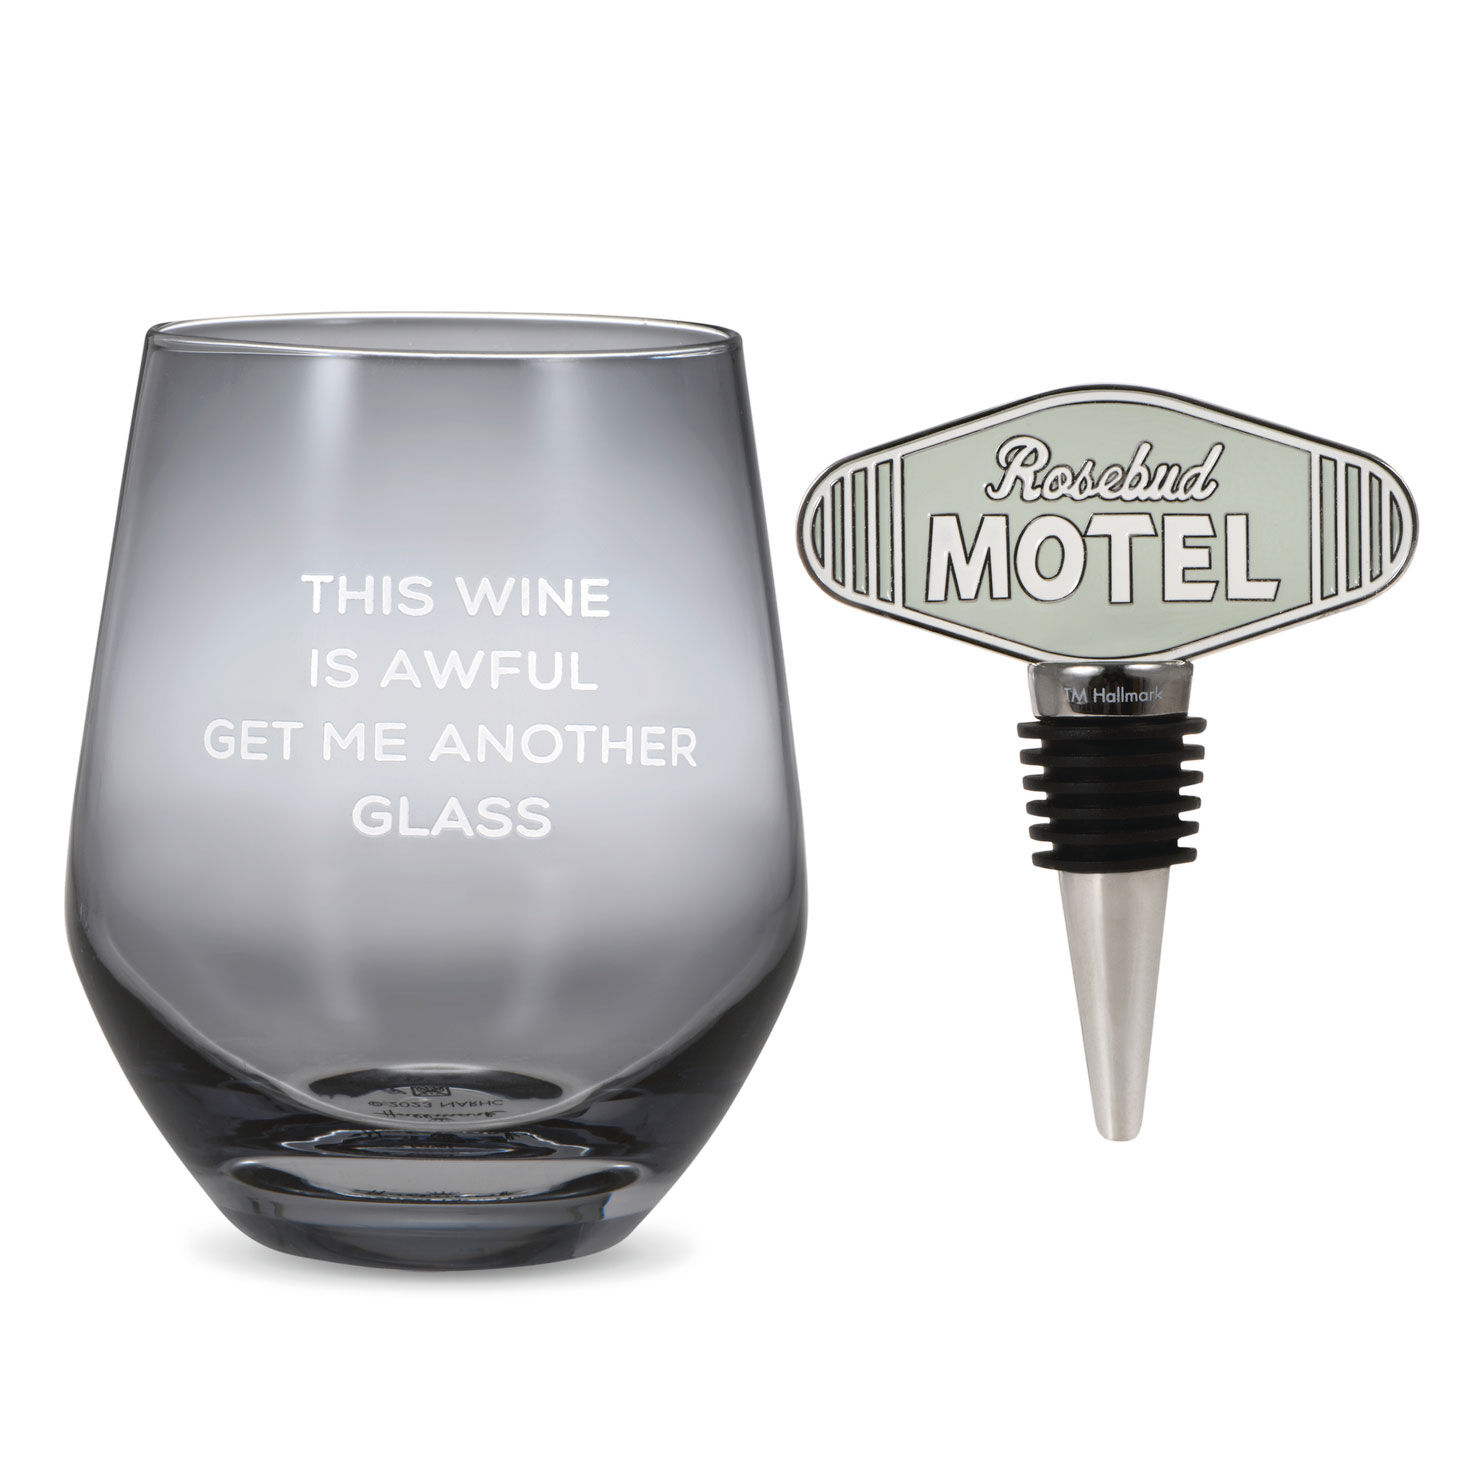 https://www.hallmark.com/dw/image/v2/AALB_PRD/on/demandware.static/-/Sites-hallmark-master/default/dw200df943/images/finished-goods/products/1PCL1026/Schitts-Creek-Stemless-Wine-Glass-and-Bottle-Stopper_1PCL1026_01.jpg?sfrm=jpg